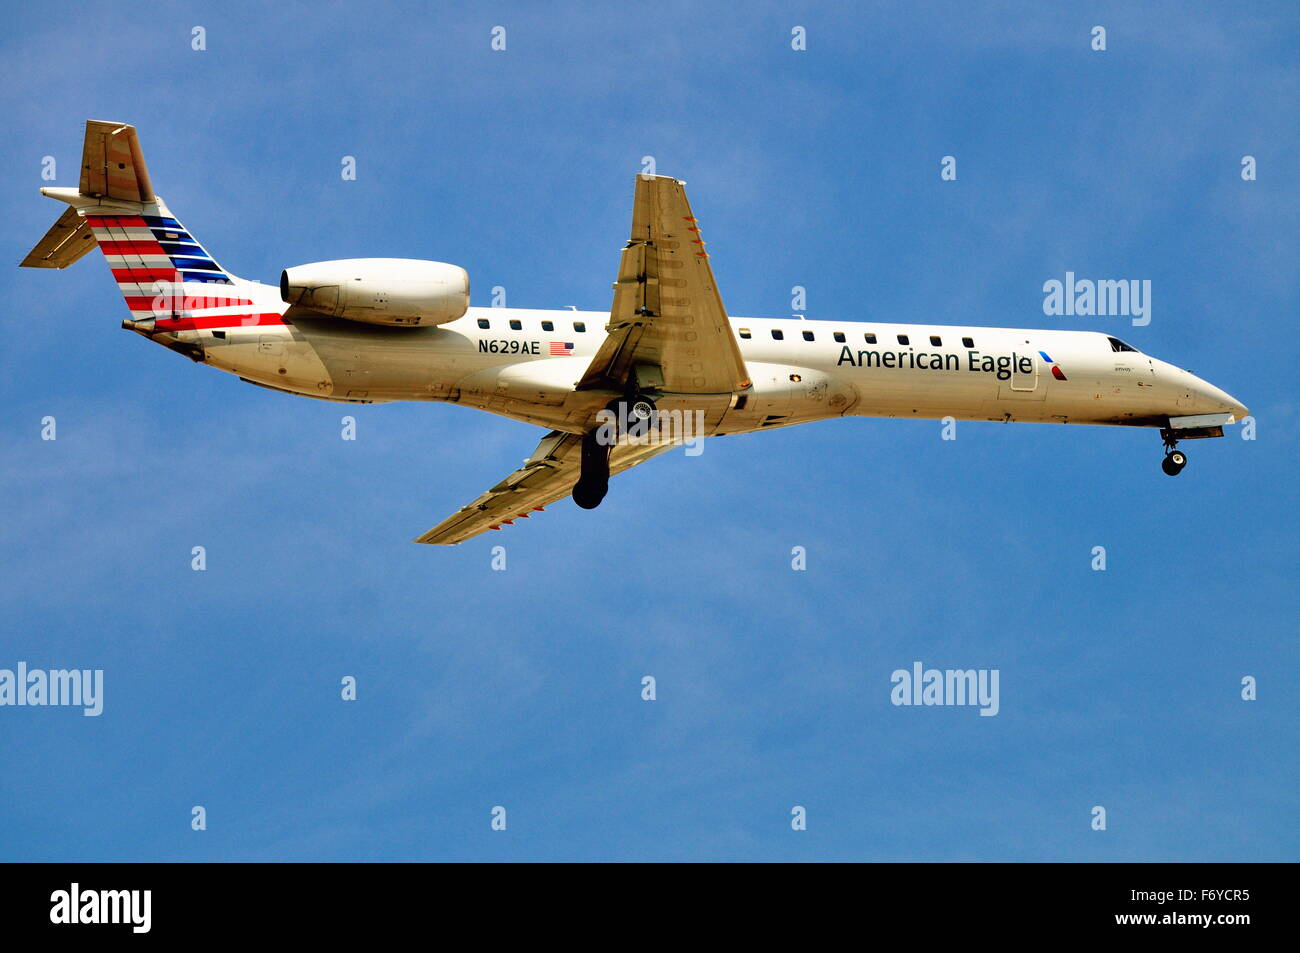 Chicago, Illinois, USA. With its landing gear down and locked, an American Eagle jet makes its final approach before landing. Stock Photo